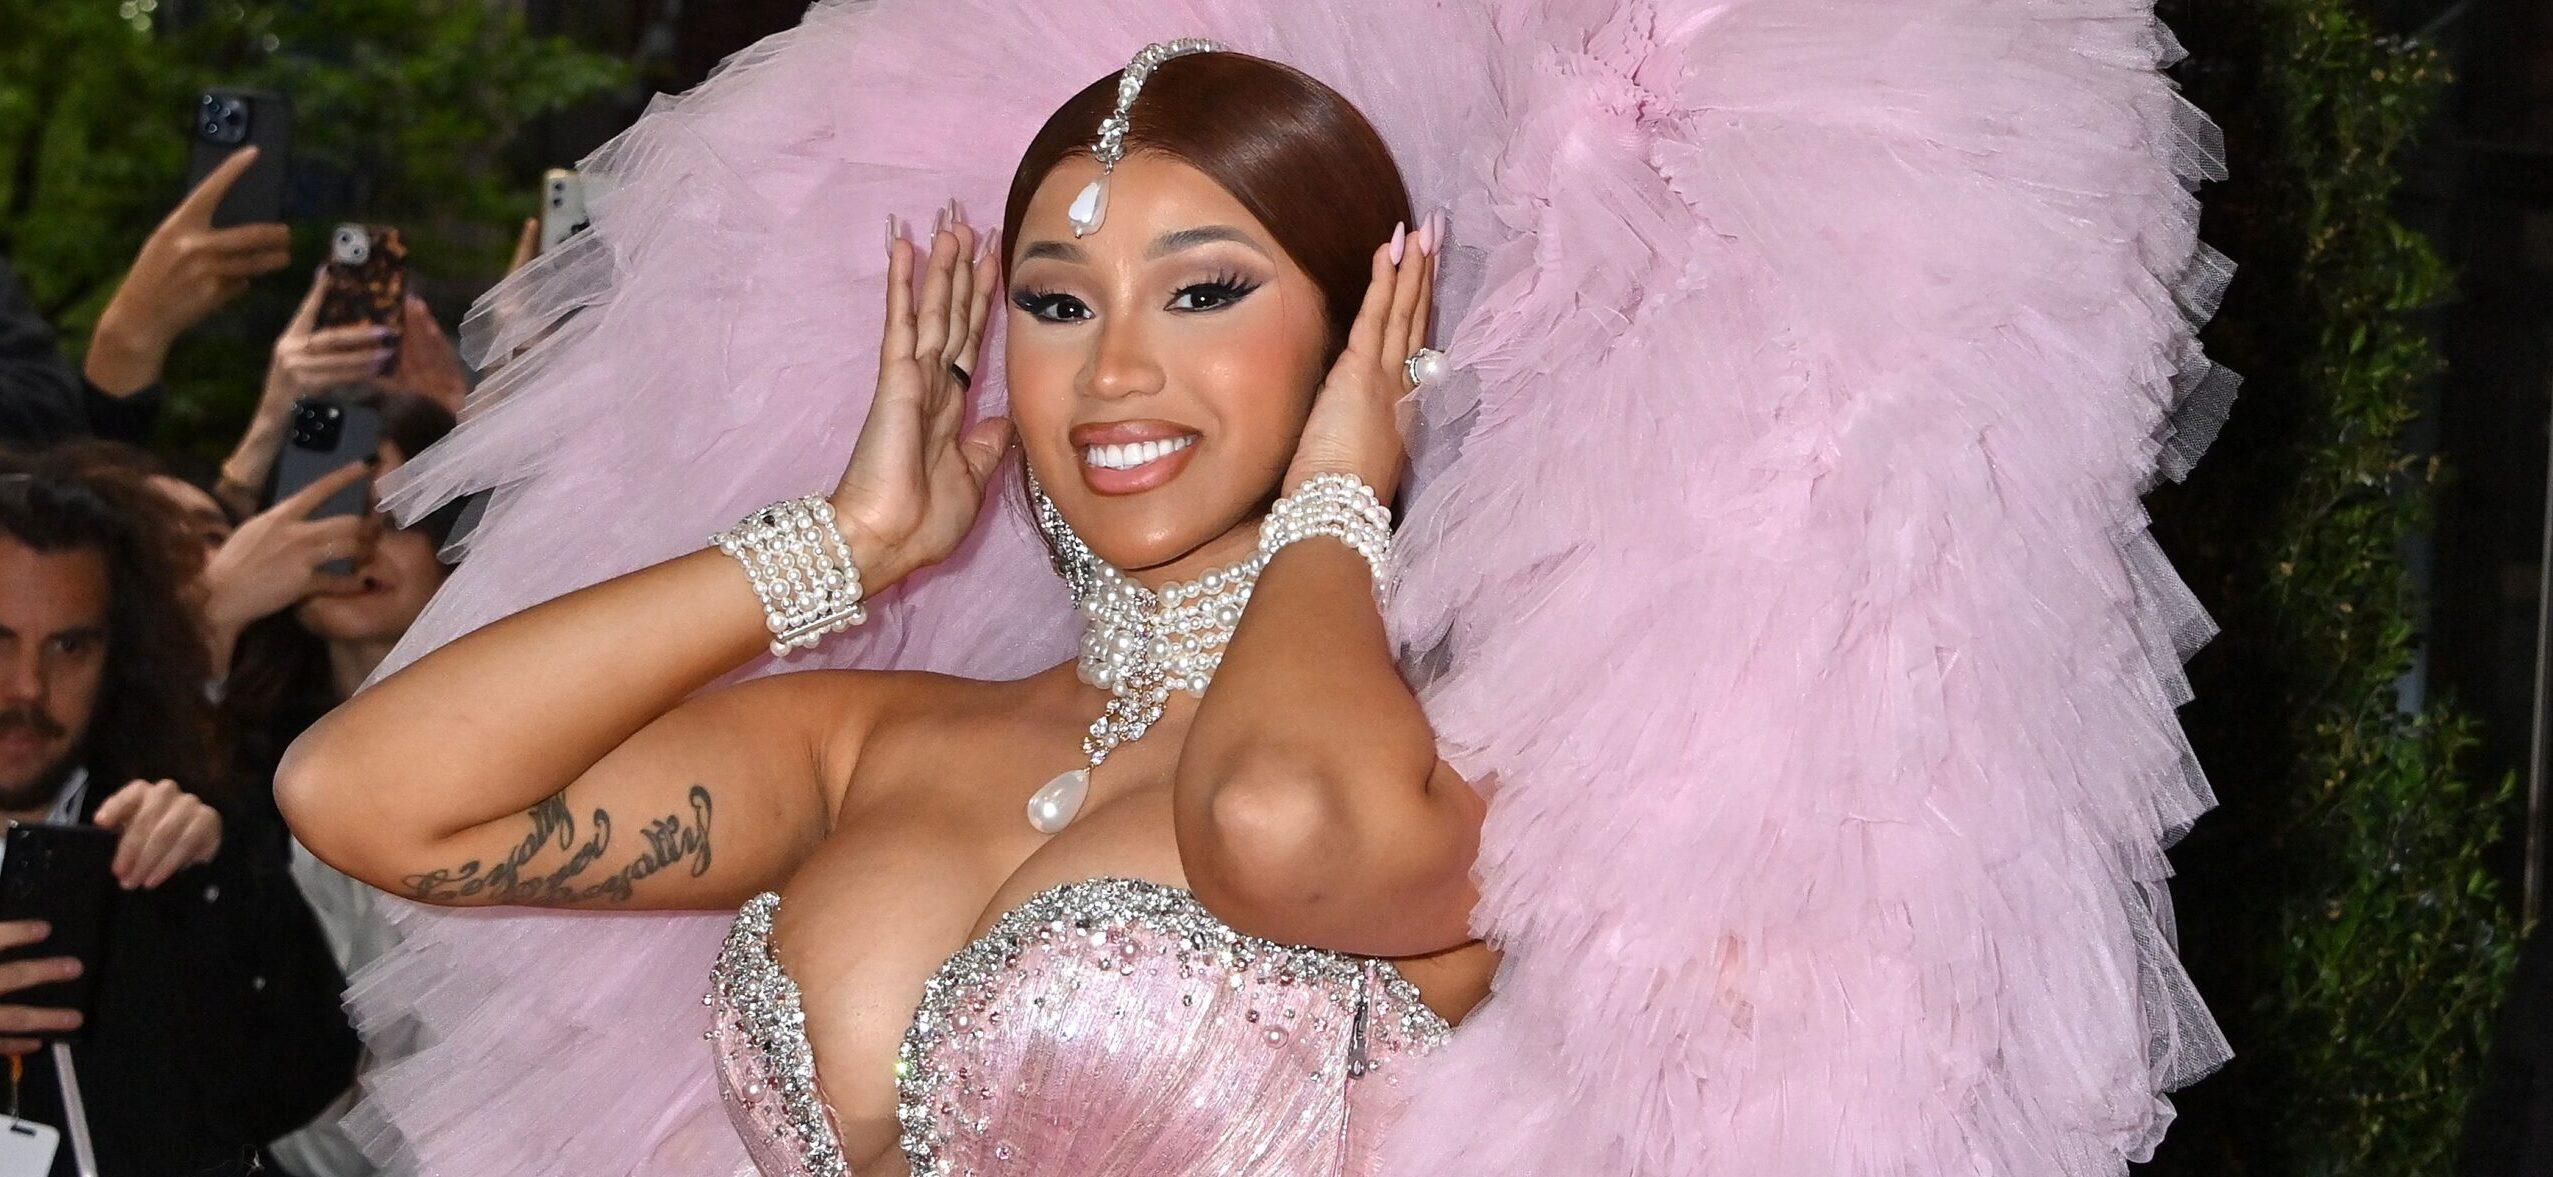 Cardi B Earns Title Of Fashion Icon In Daring Colorful Catsuit & Gold Chain G-String